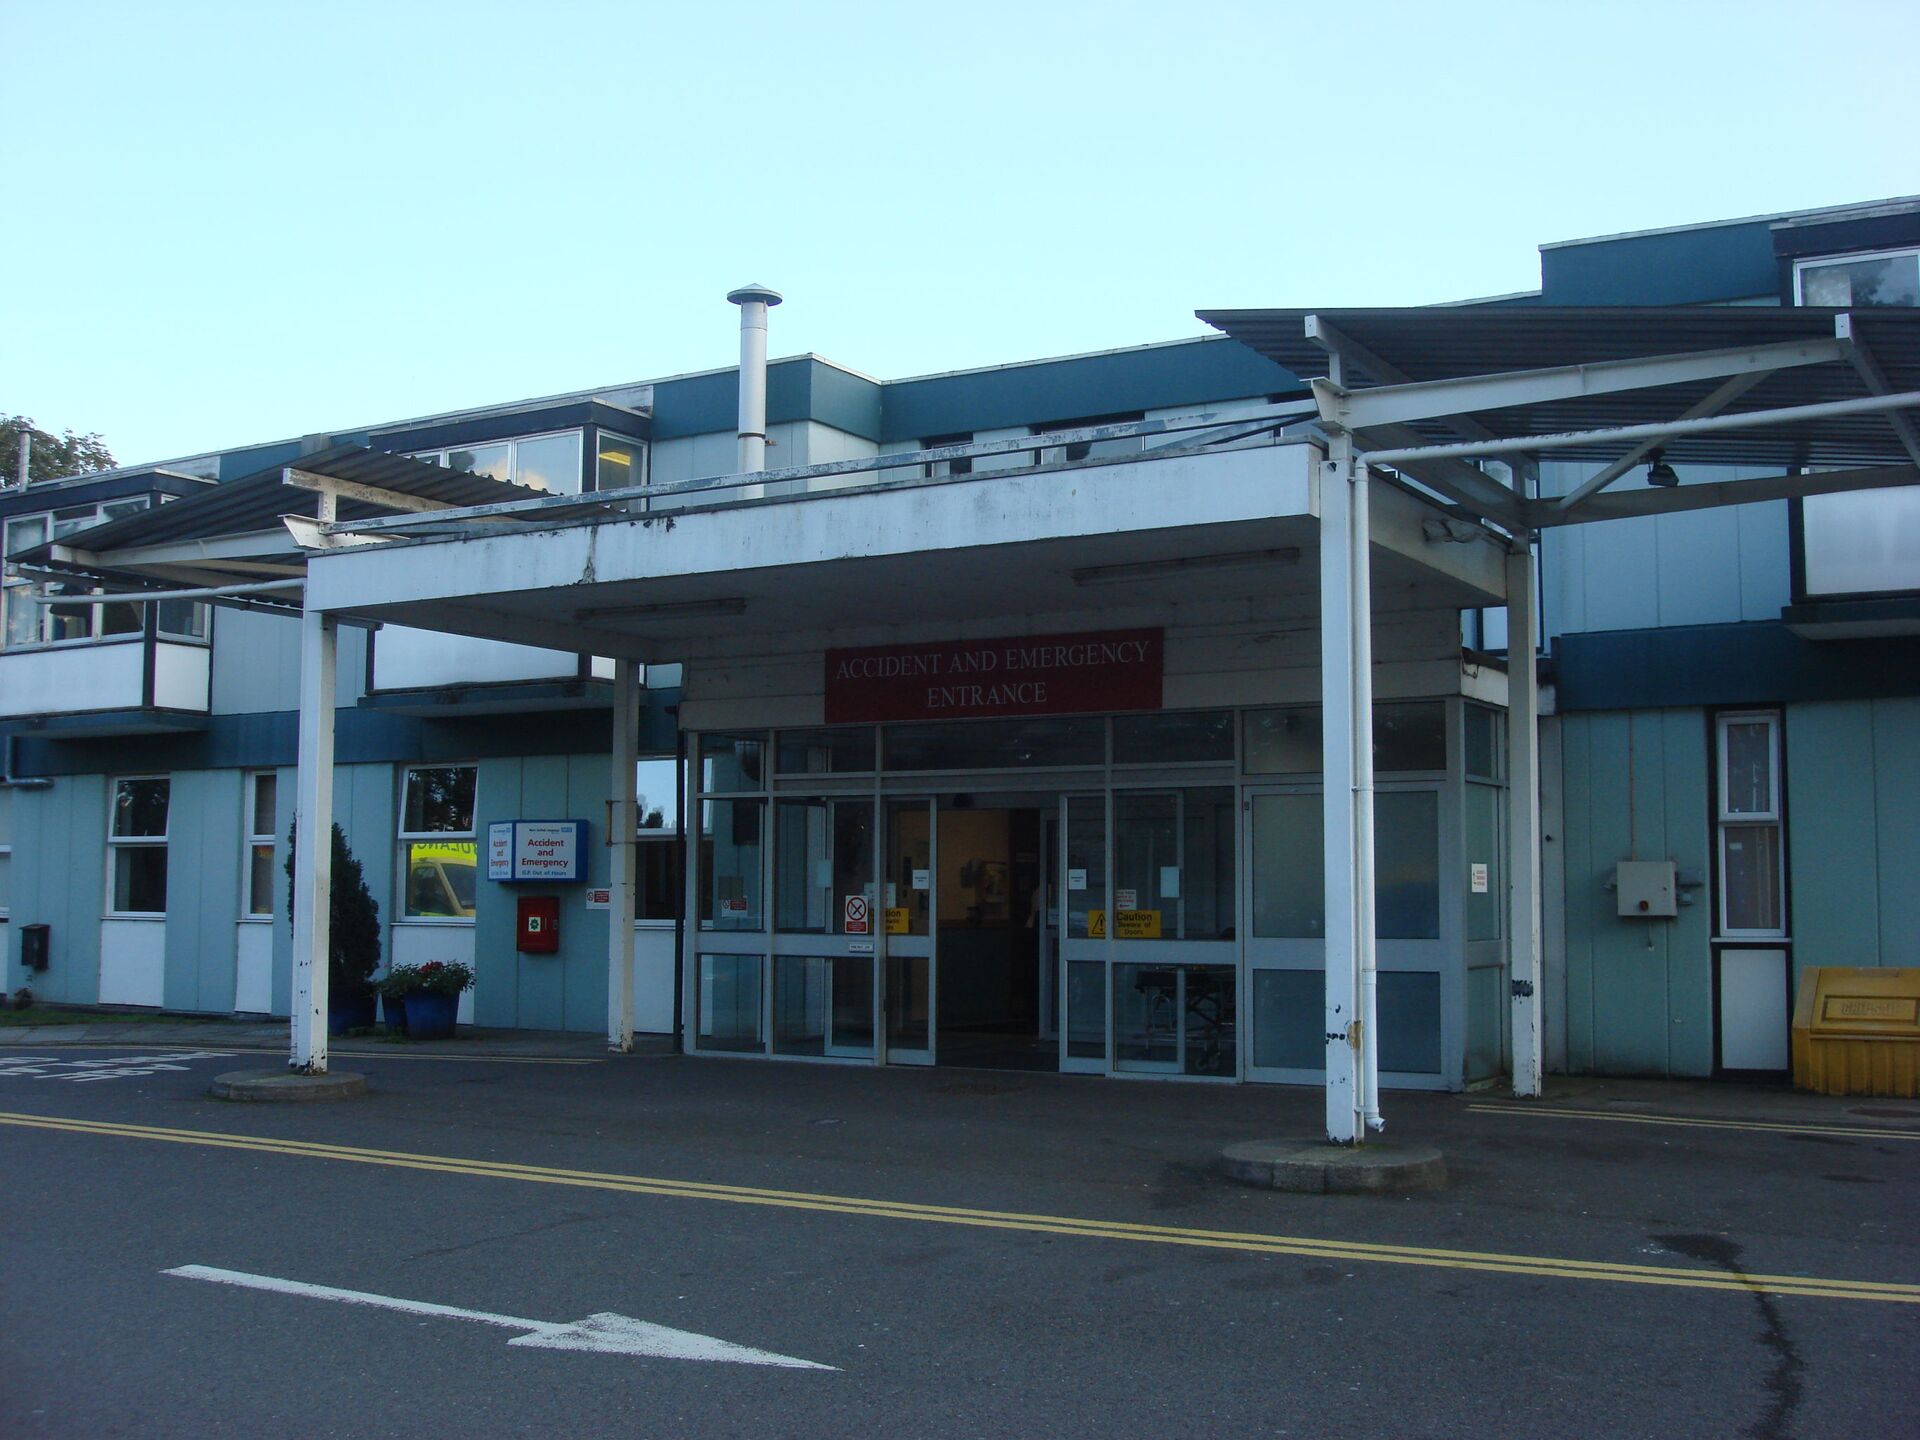 The entrance to Accident and Emergency at West Suffolk Hospital, UK, in 2010 - Sputnik International, 1920, 15.11.2021